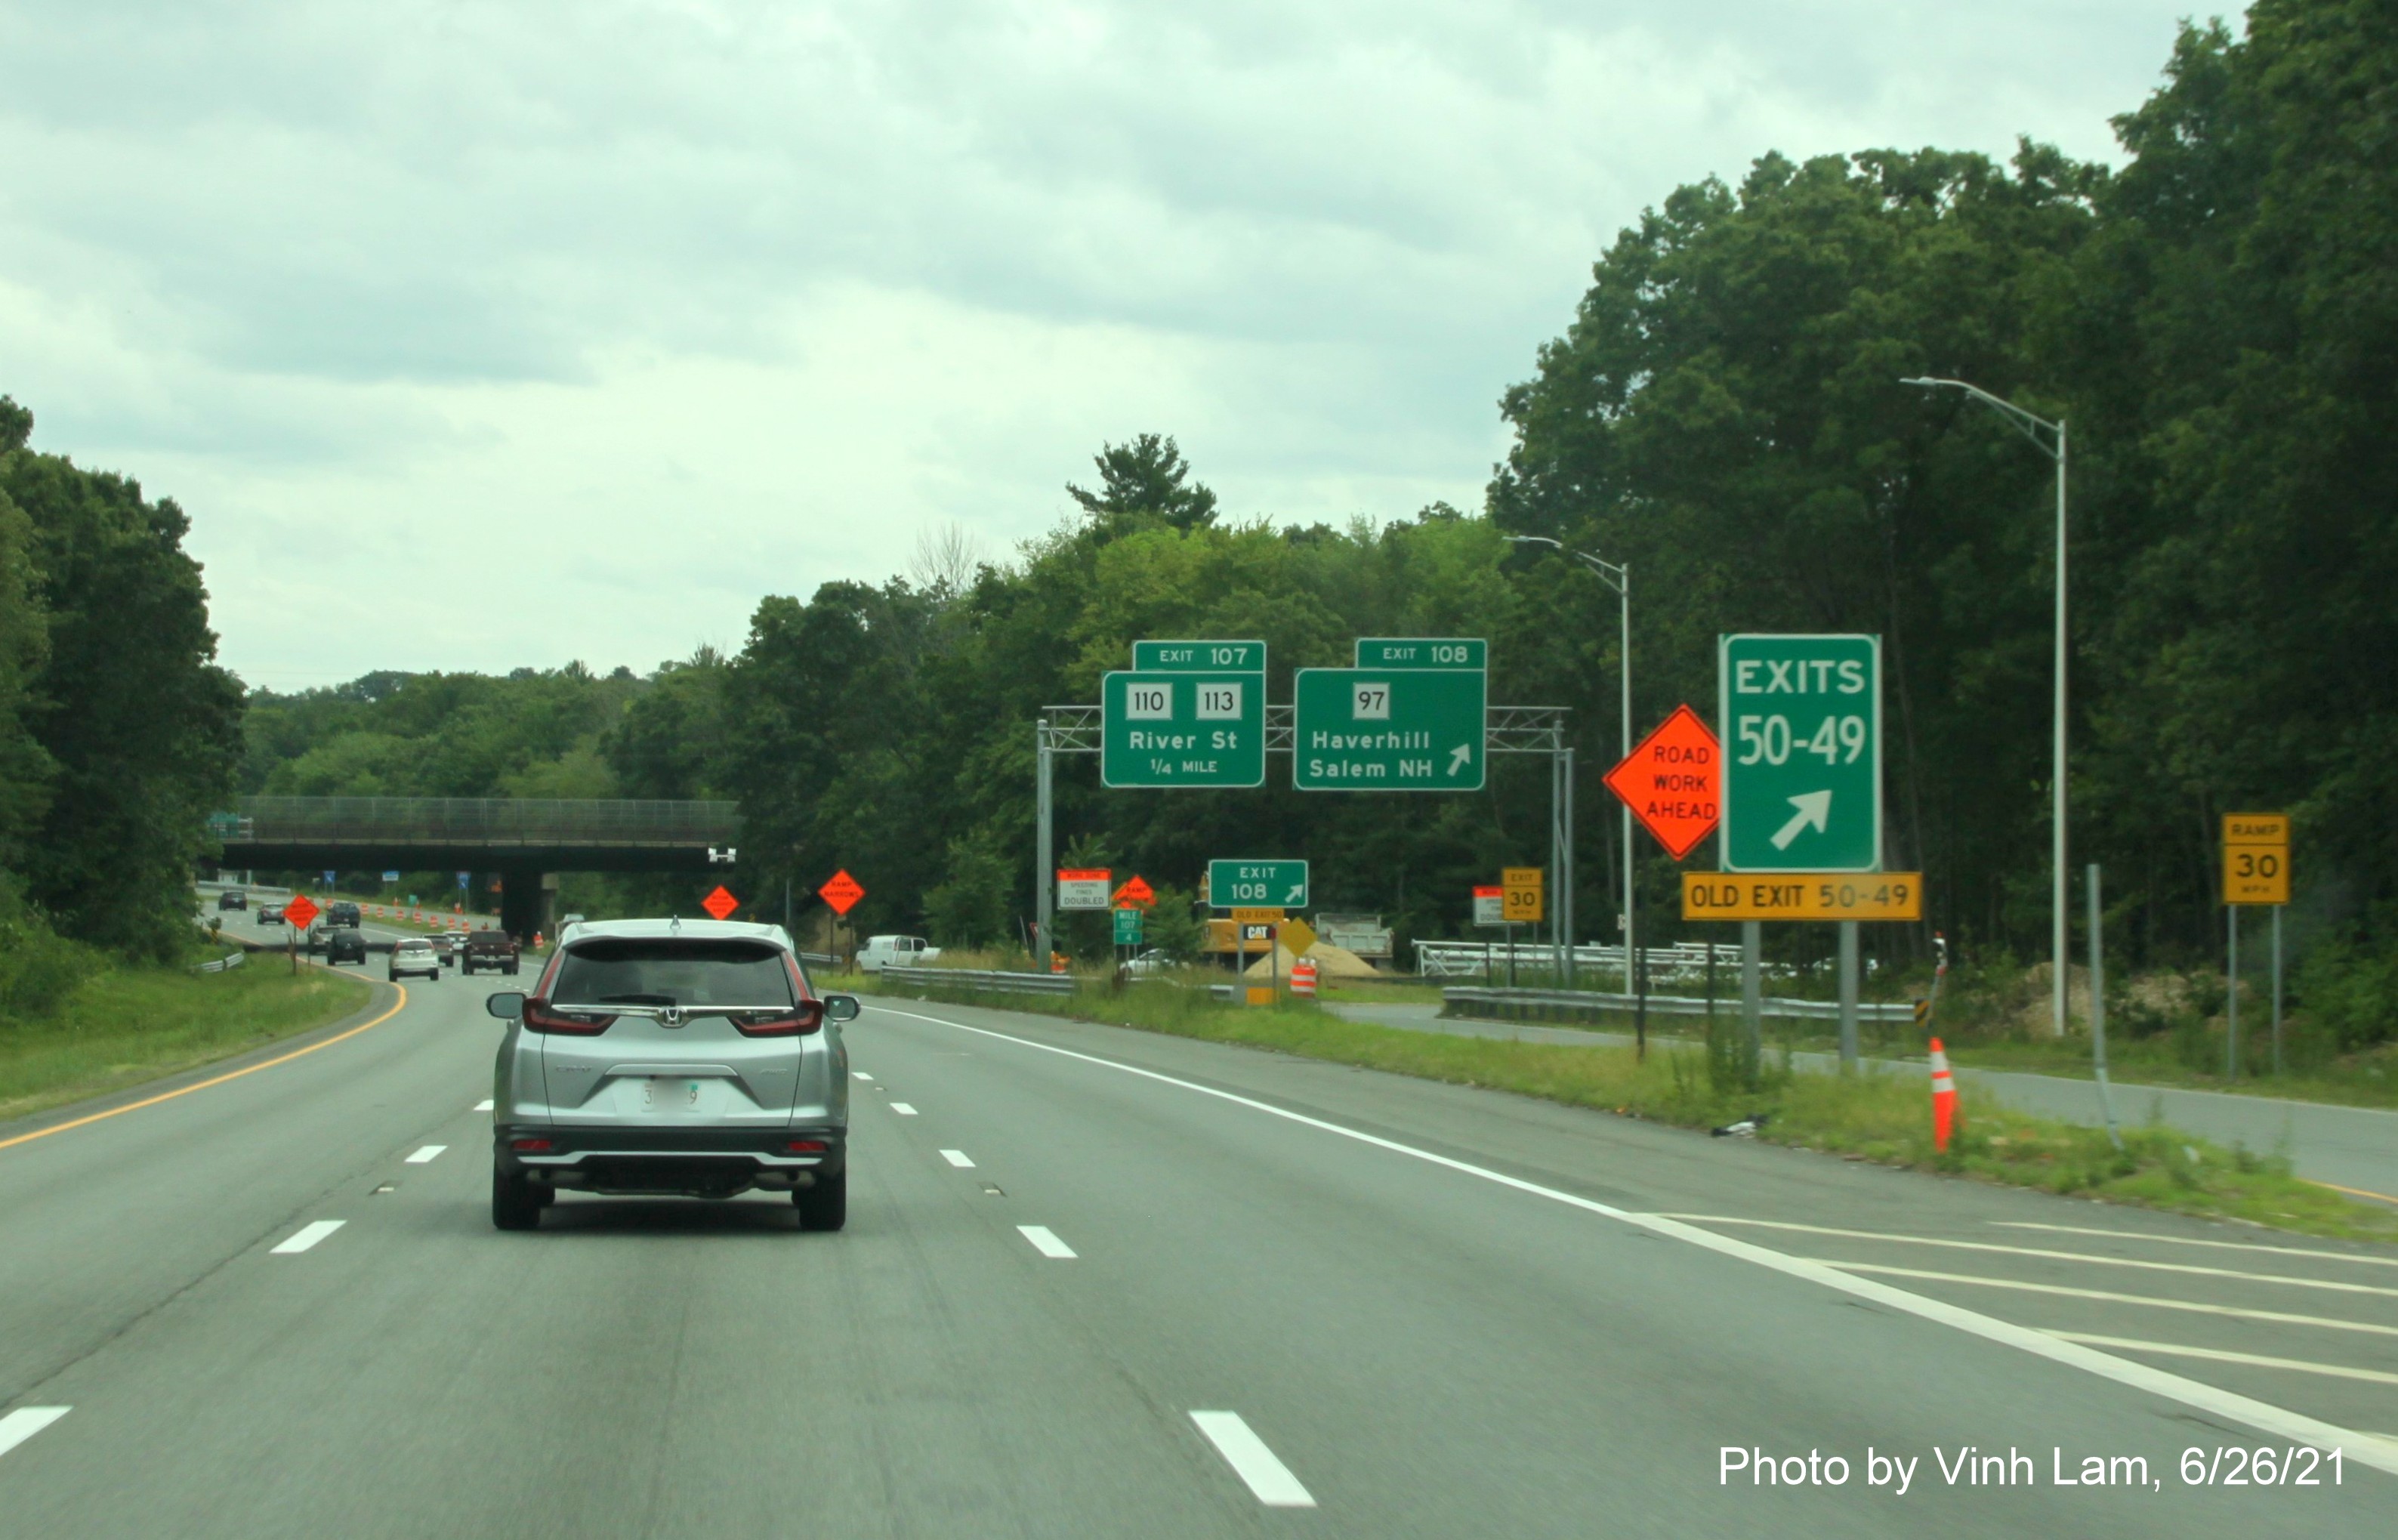 Image of gore sign at start of C/D lanes for MA 97 and MA 110/113 exits with unchanged sequential exit numbers and yellow Old Exit 50-49 sign below as seen from I-495 South in Haverhill, photo by Vinh Lam, June 2021